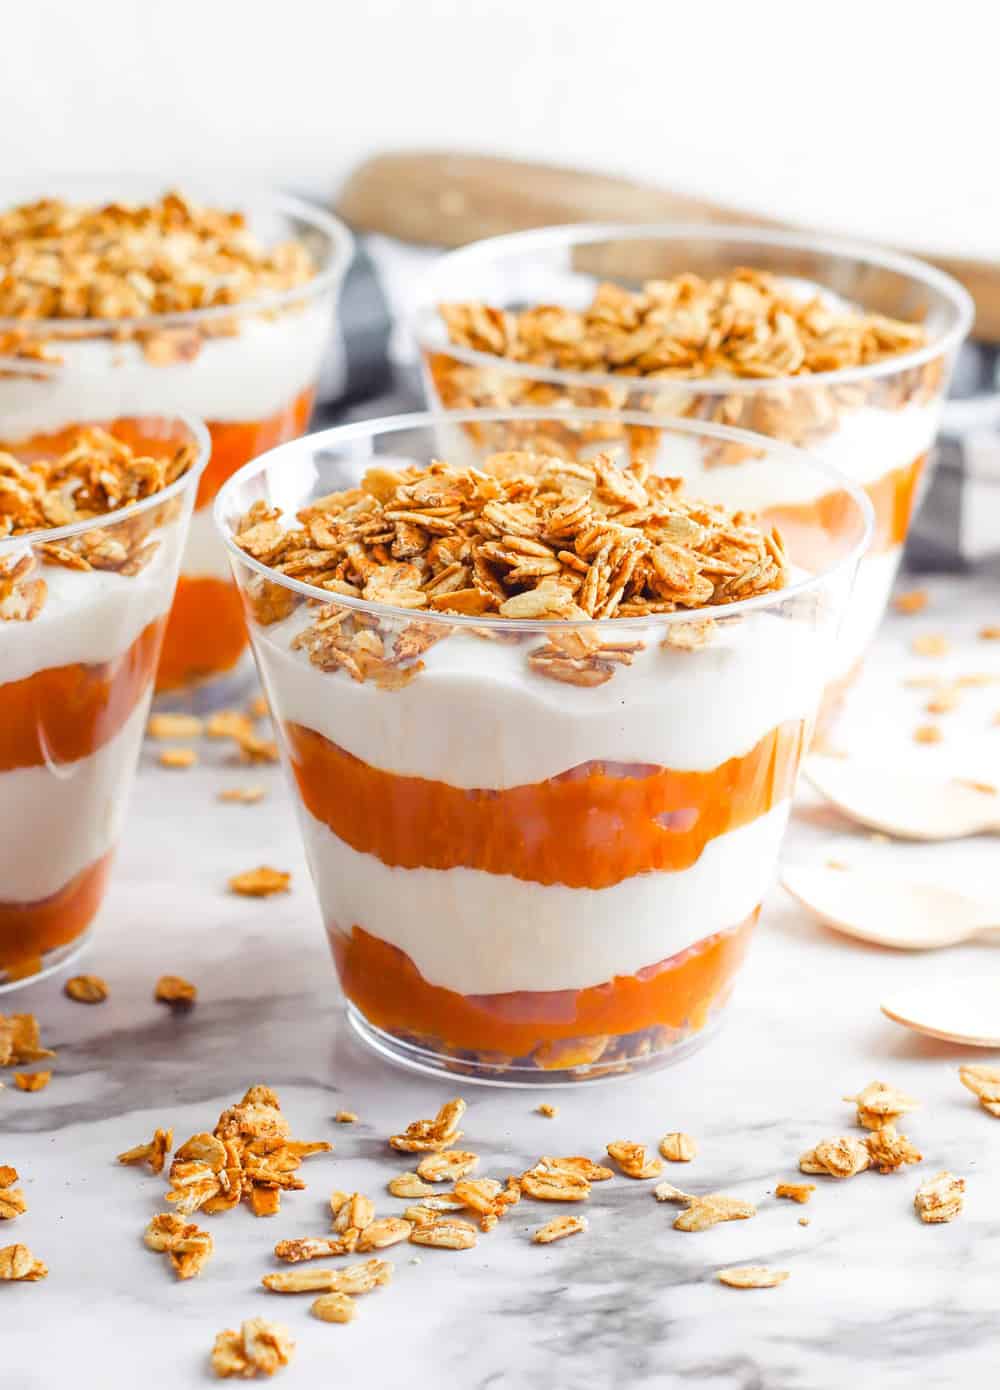 pumpkin greek yogurt parfait, with layers of pumpkin puree and yogurt, topped with granola in a glass cup